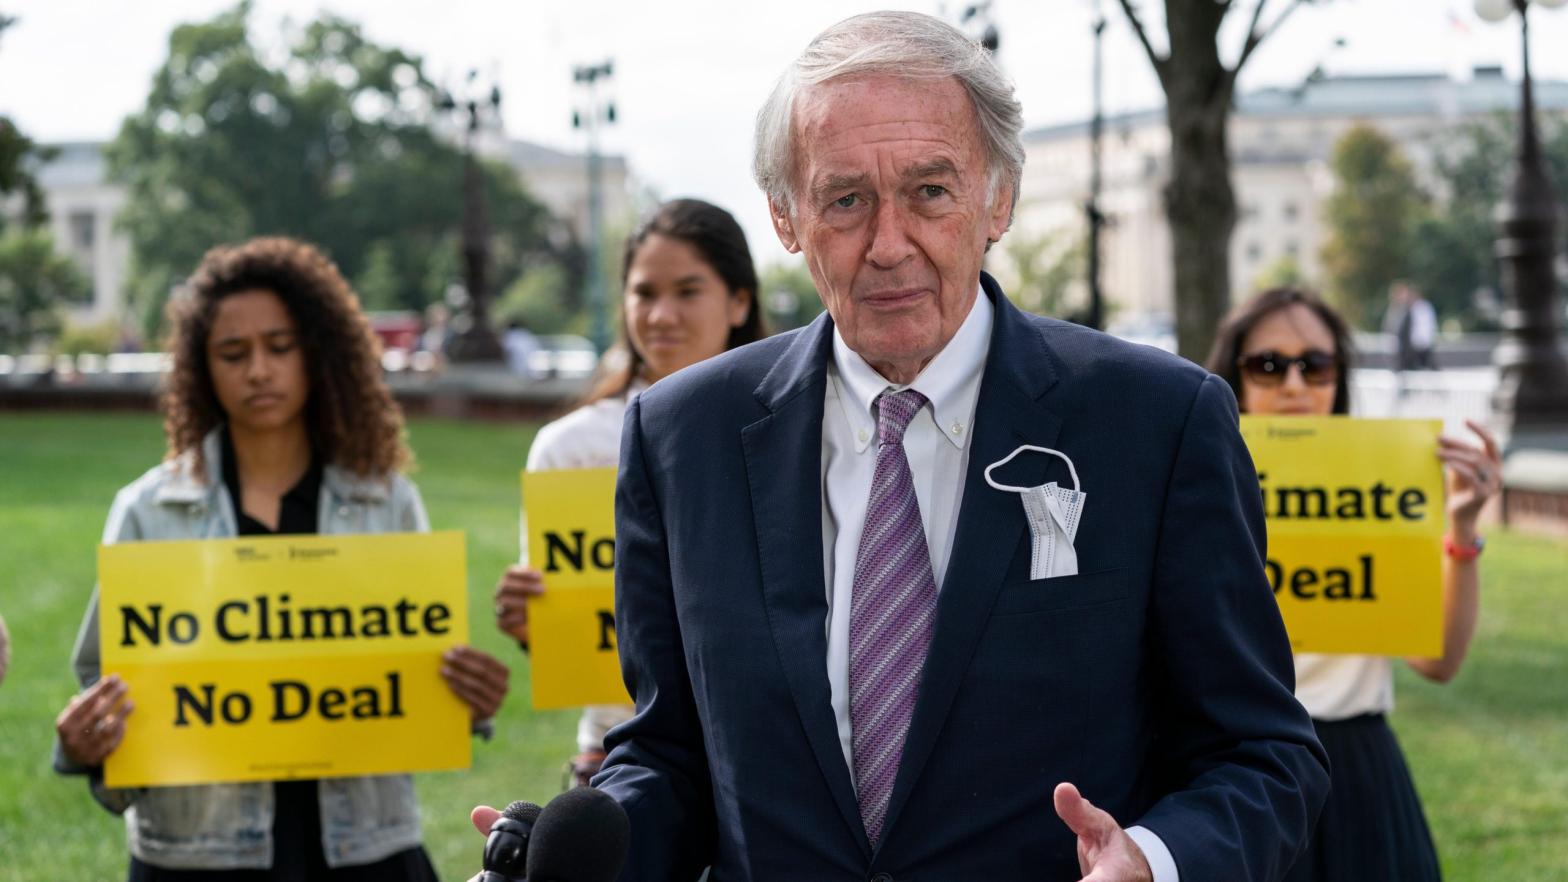 Markey speaks about climate change during a news conference on Capitol Hill, Thursday, Oct. 7, 2021. (Photo: Alex Brandon, AP)